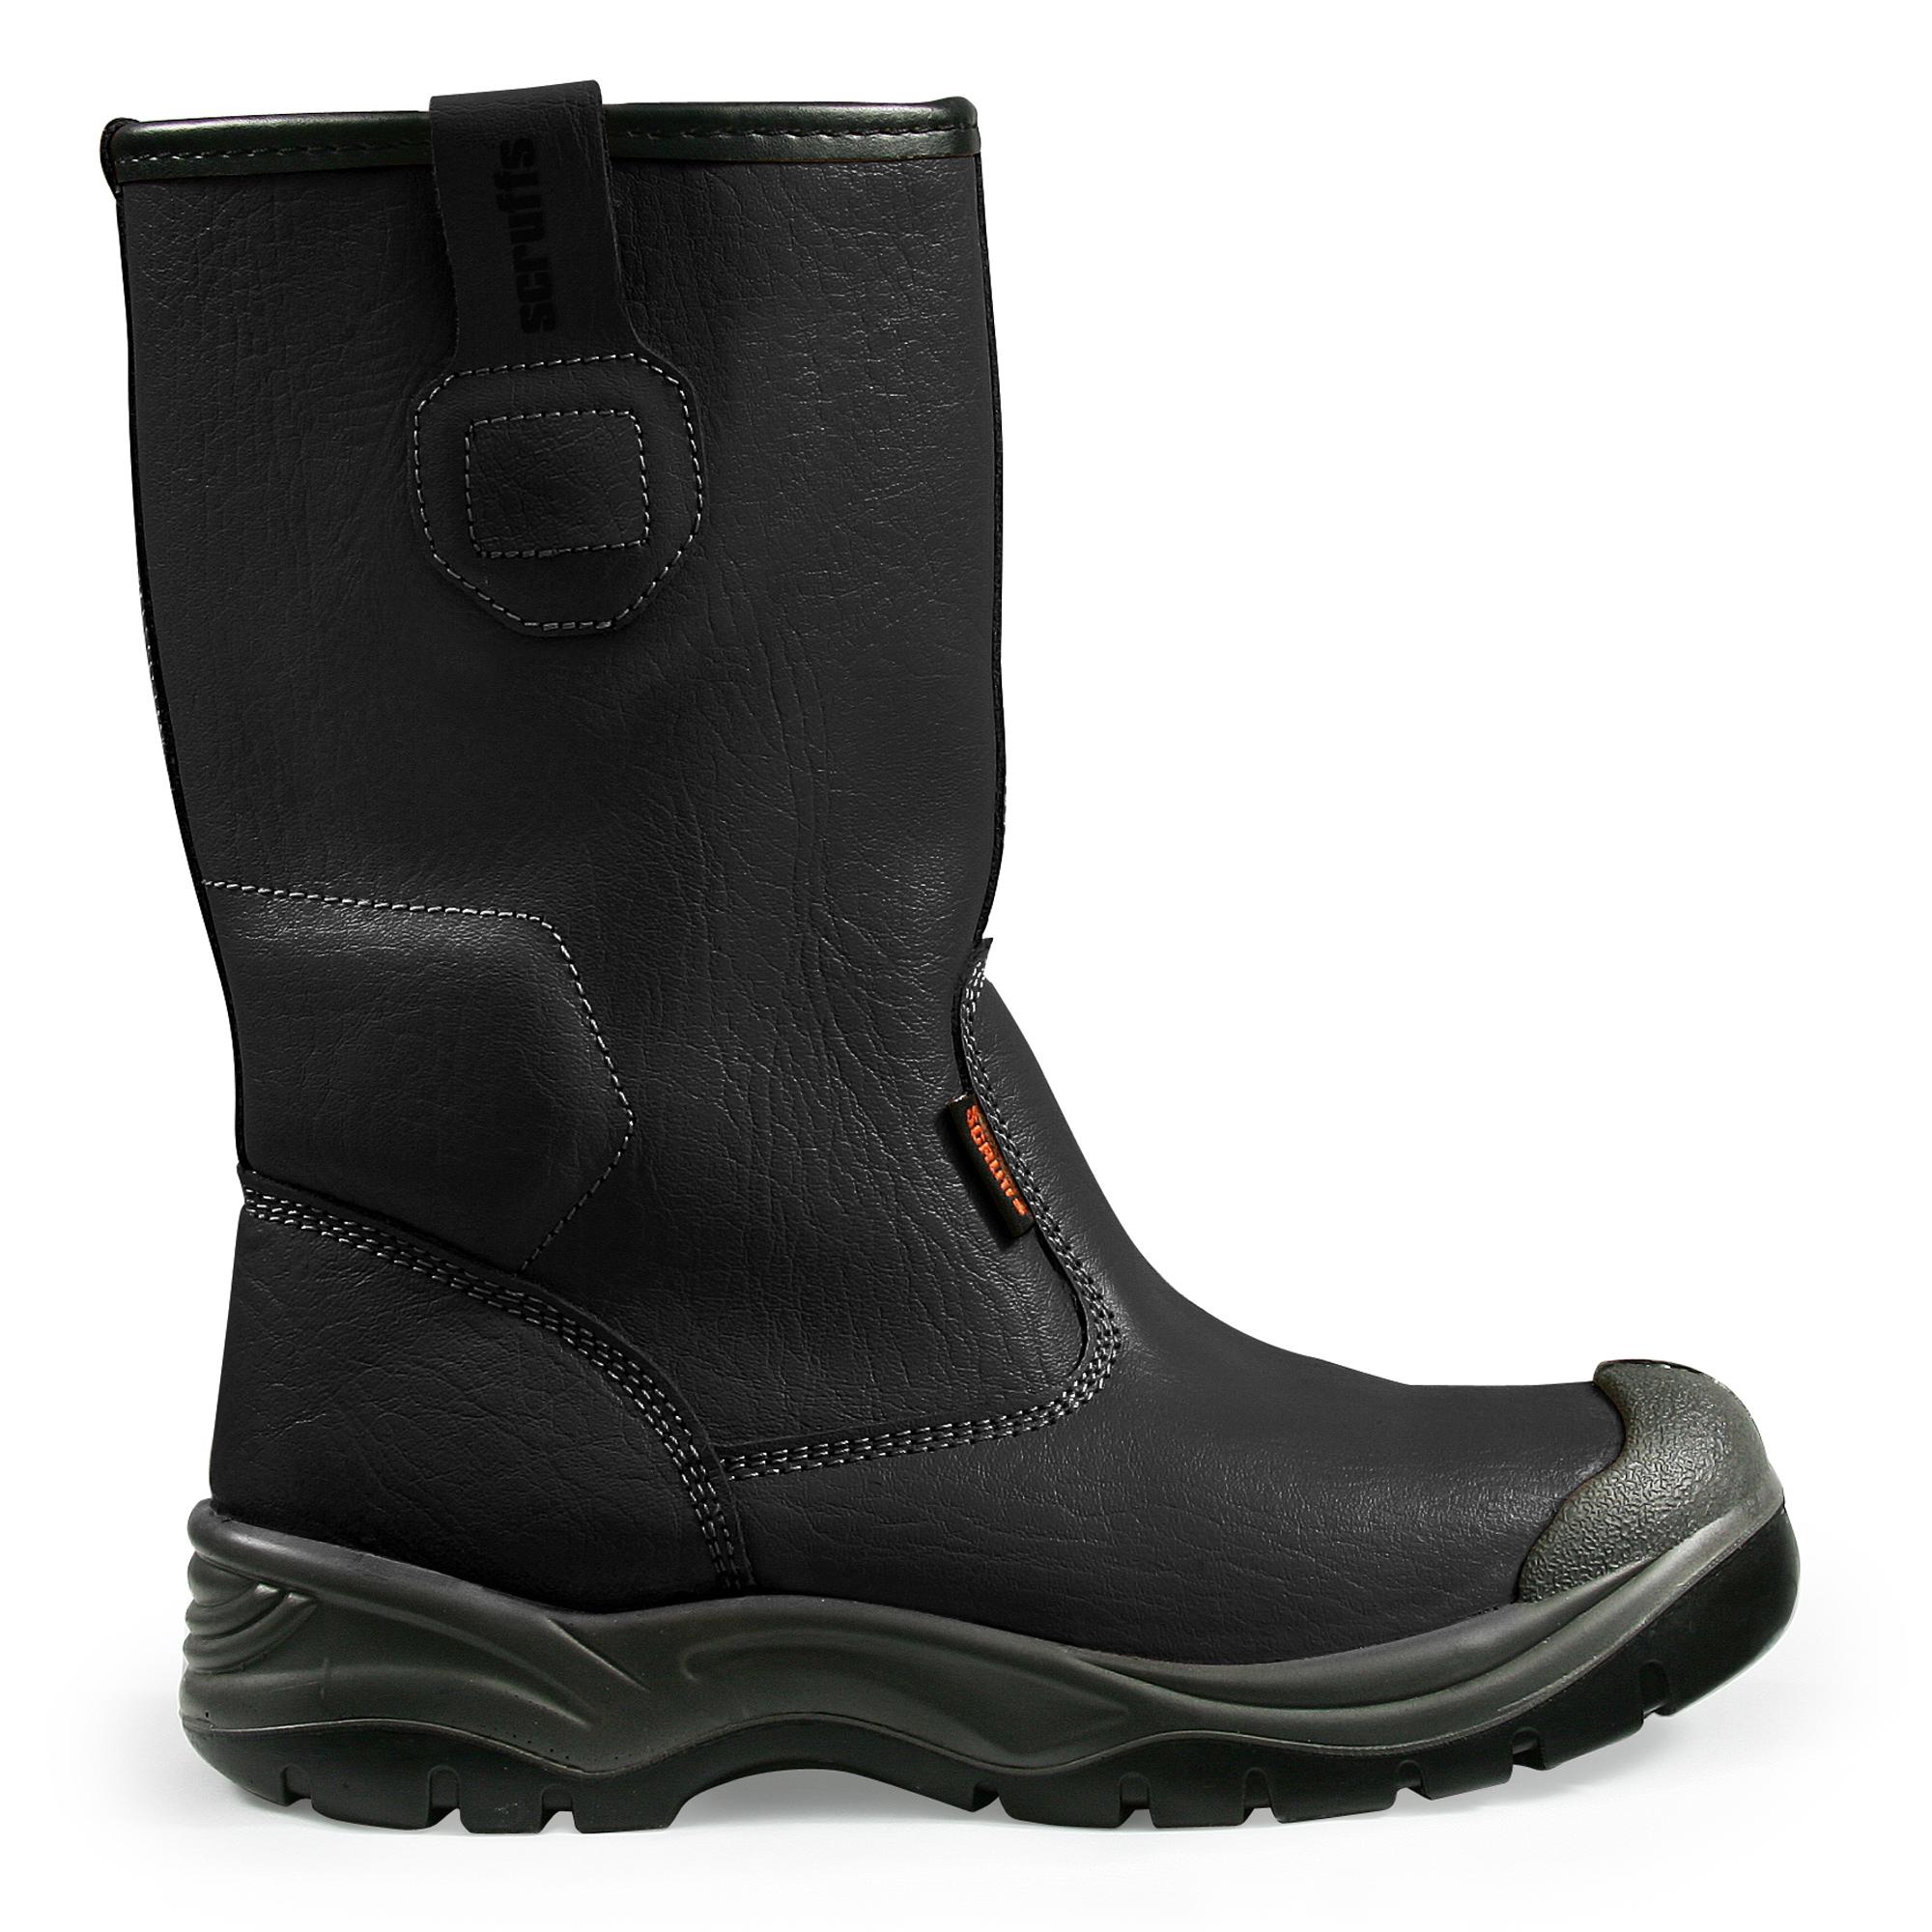 Gravity Rigger Boots Black Size 8